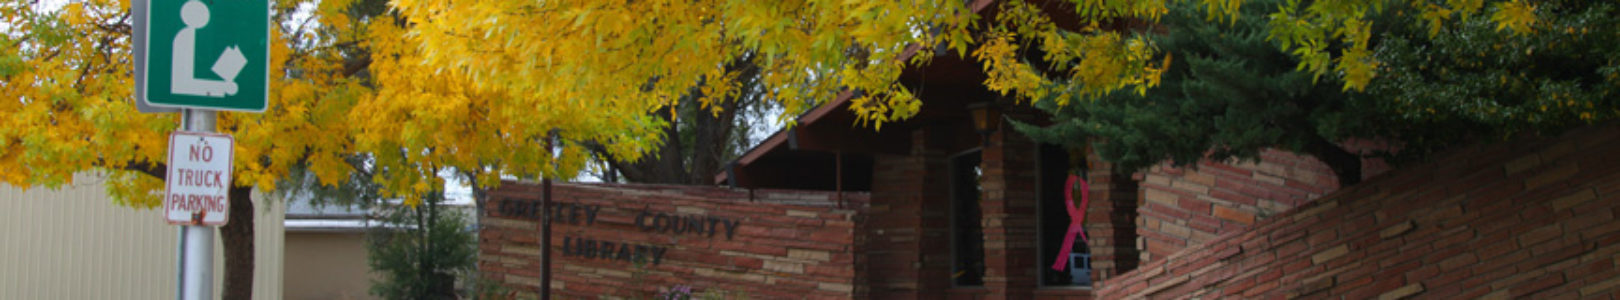 Greeley County Library